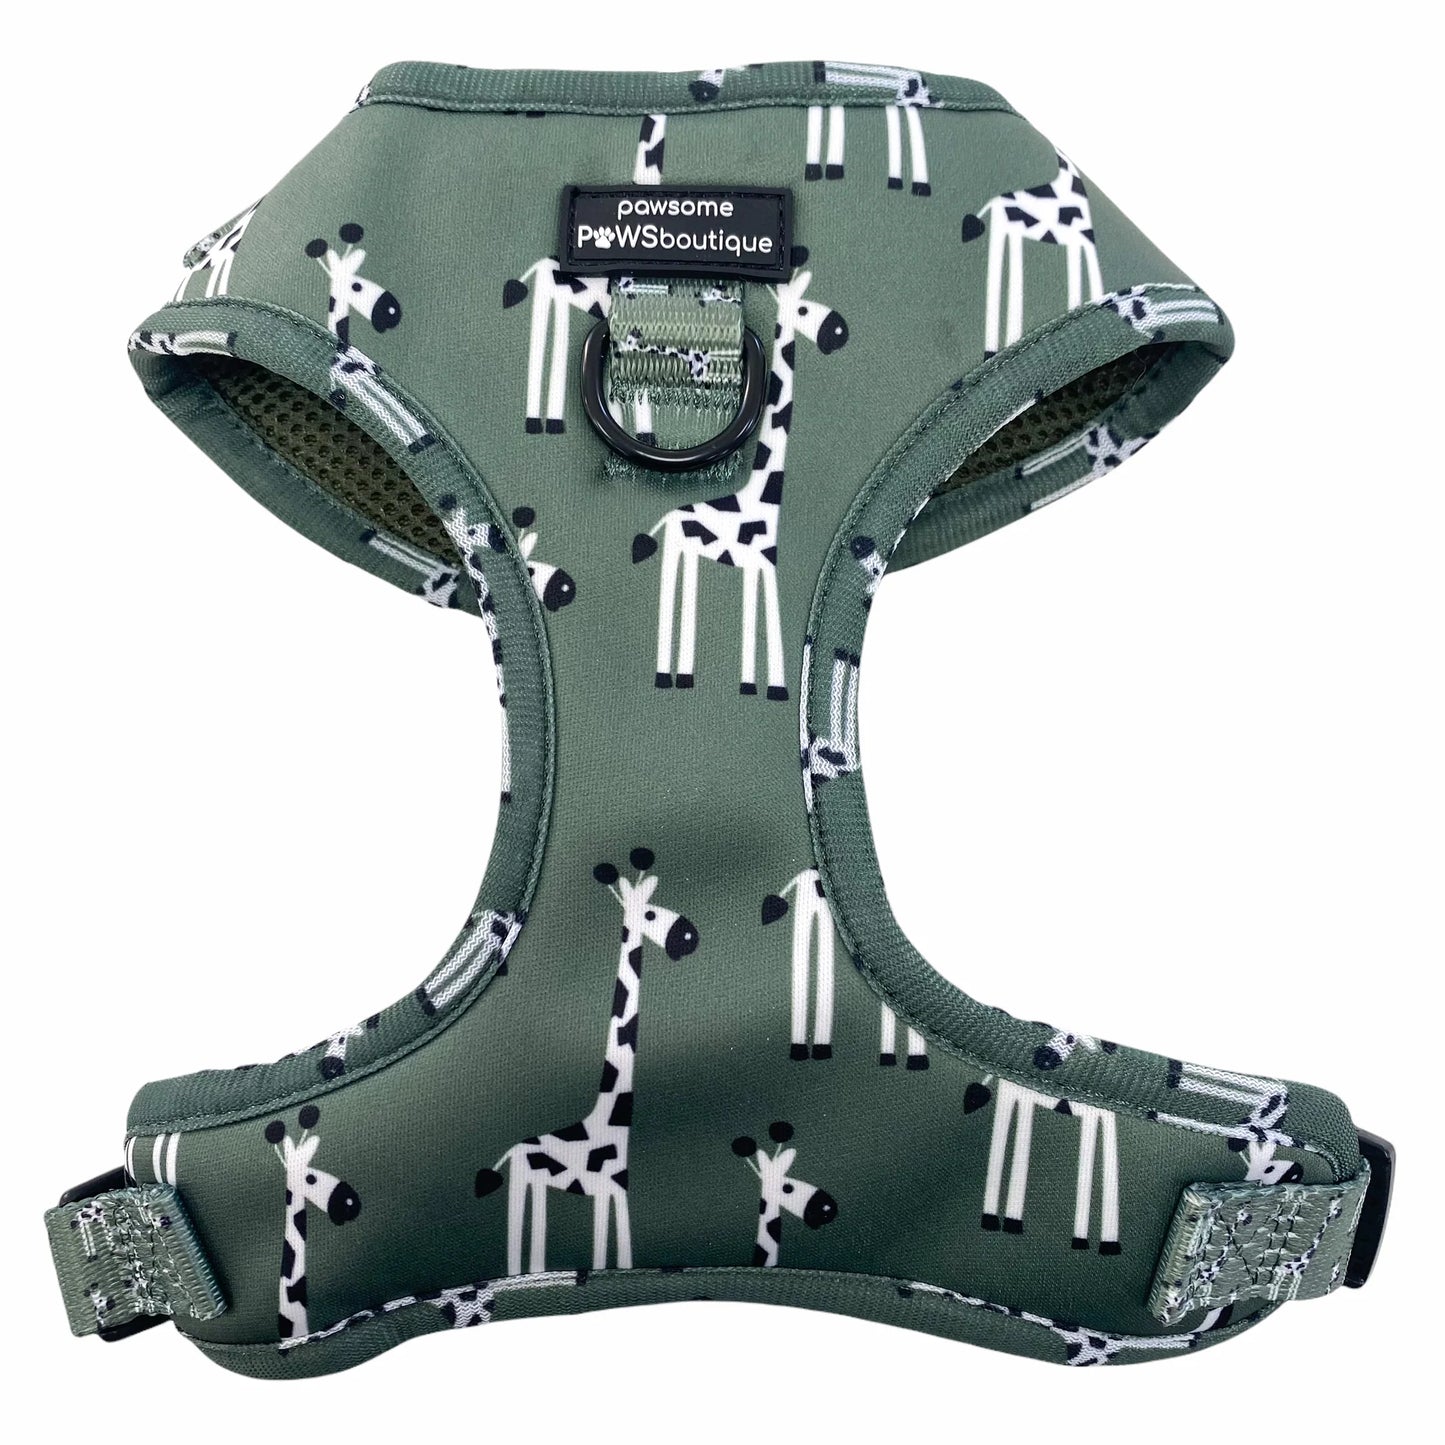 D-Ring Adjustable Harness - Gregory The Giraffe